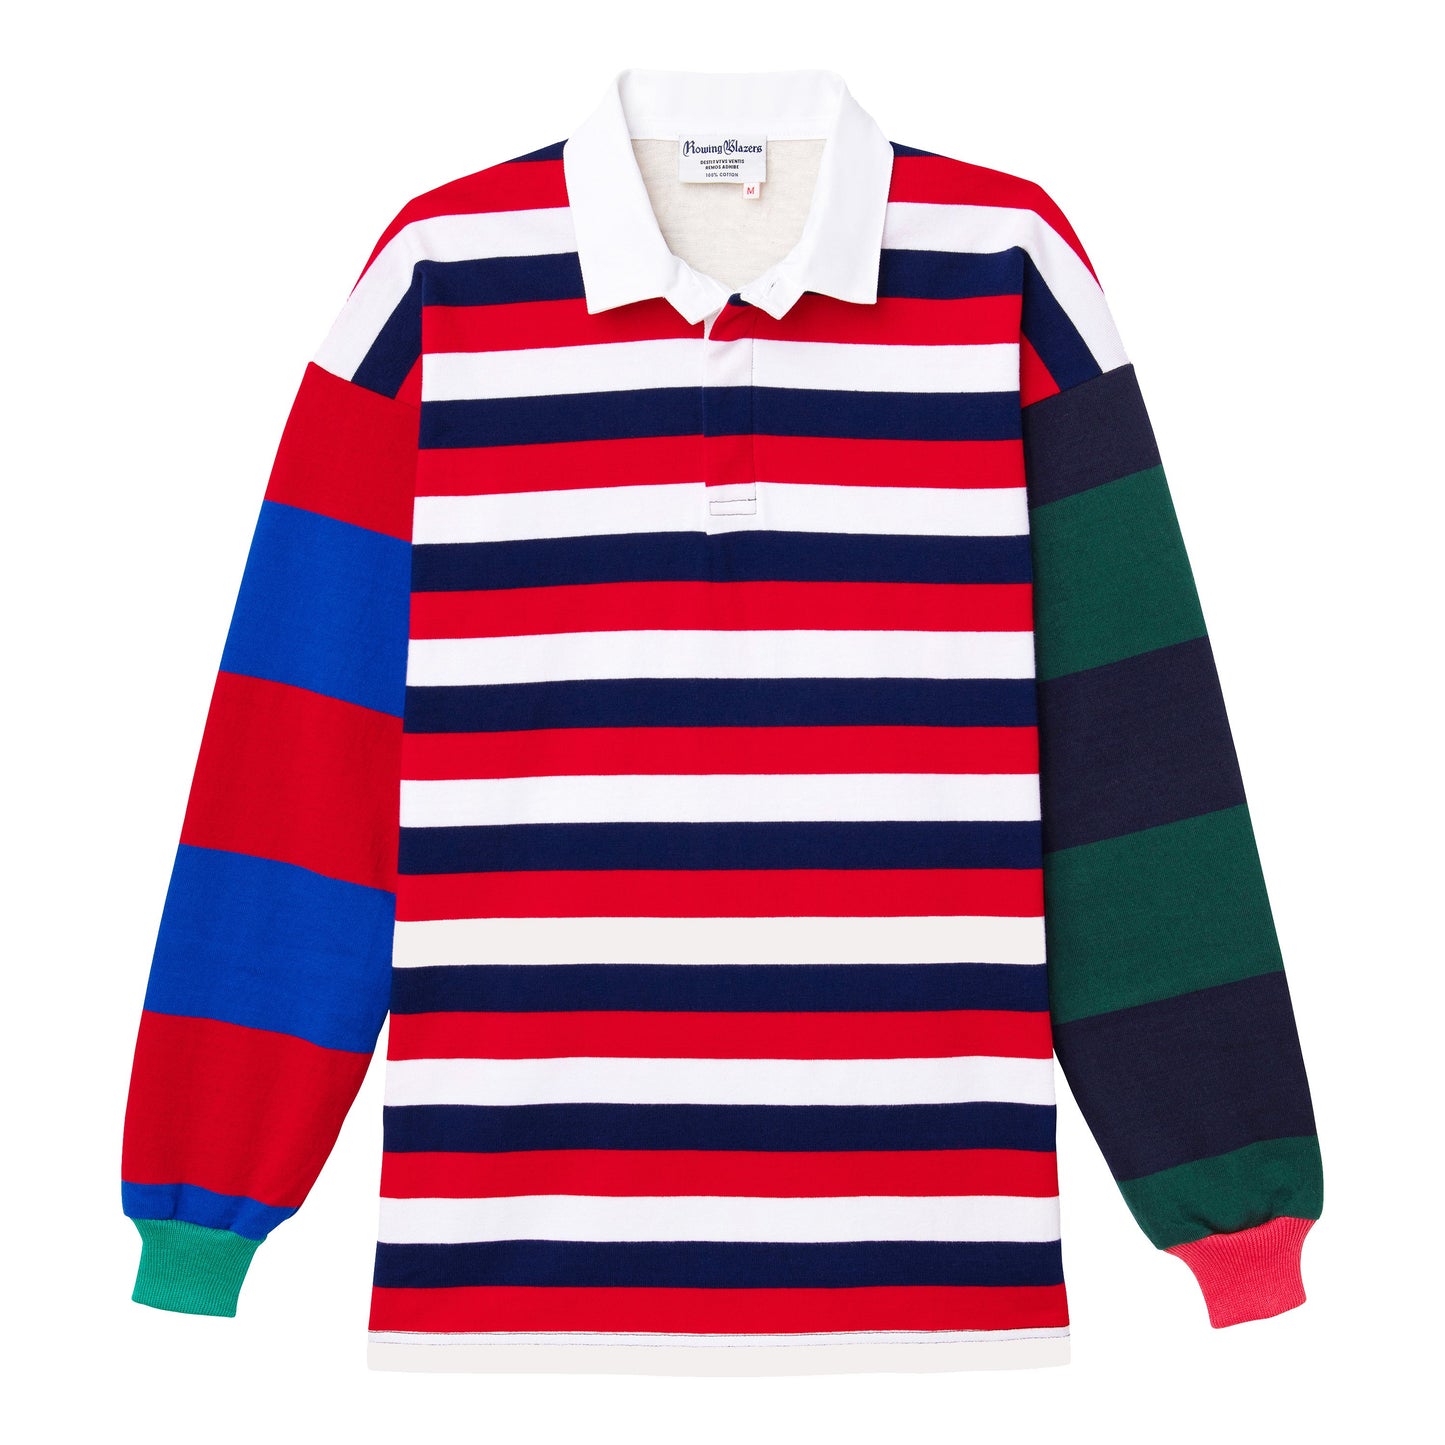 One-of-one striped rugby shirt made from leftover fabric. Red, white, and blue body and mismatched sleeves. Each is unique.